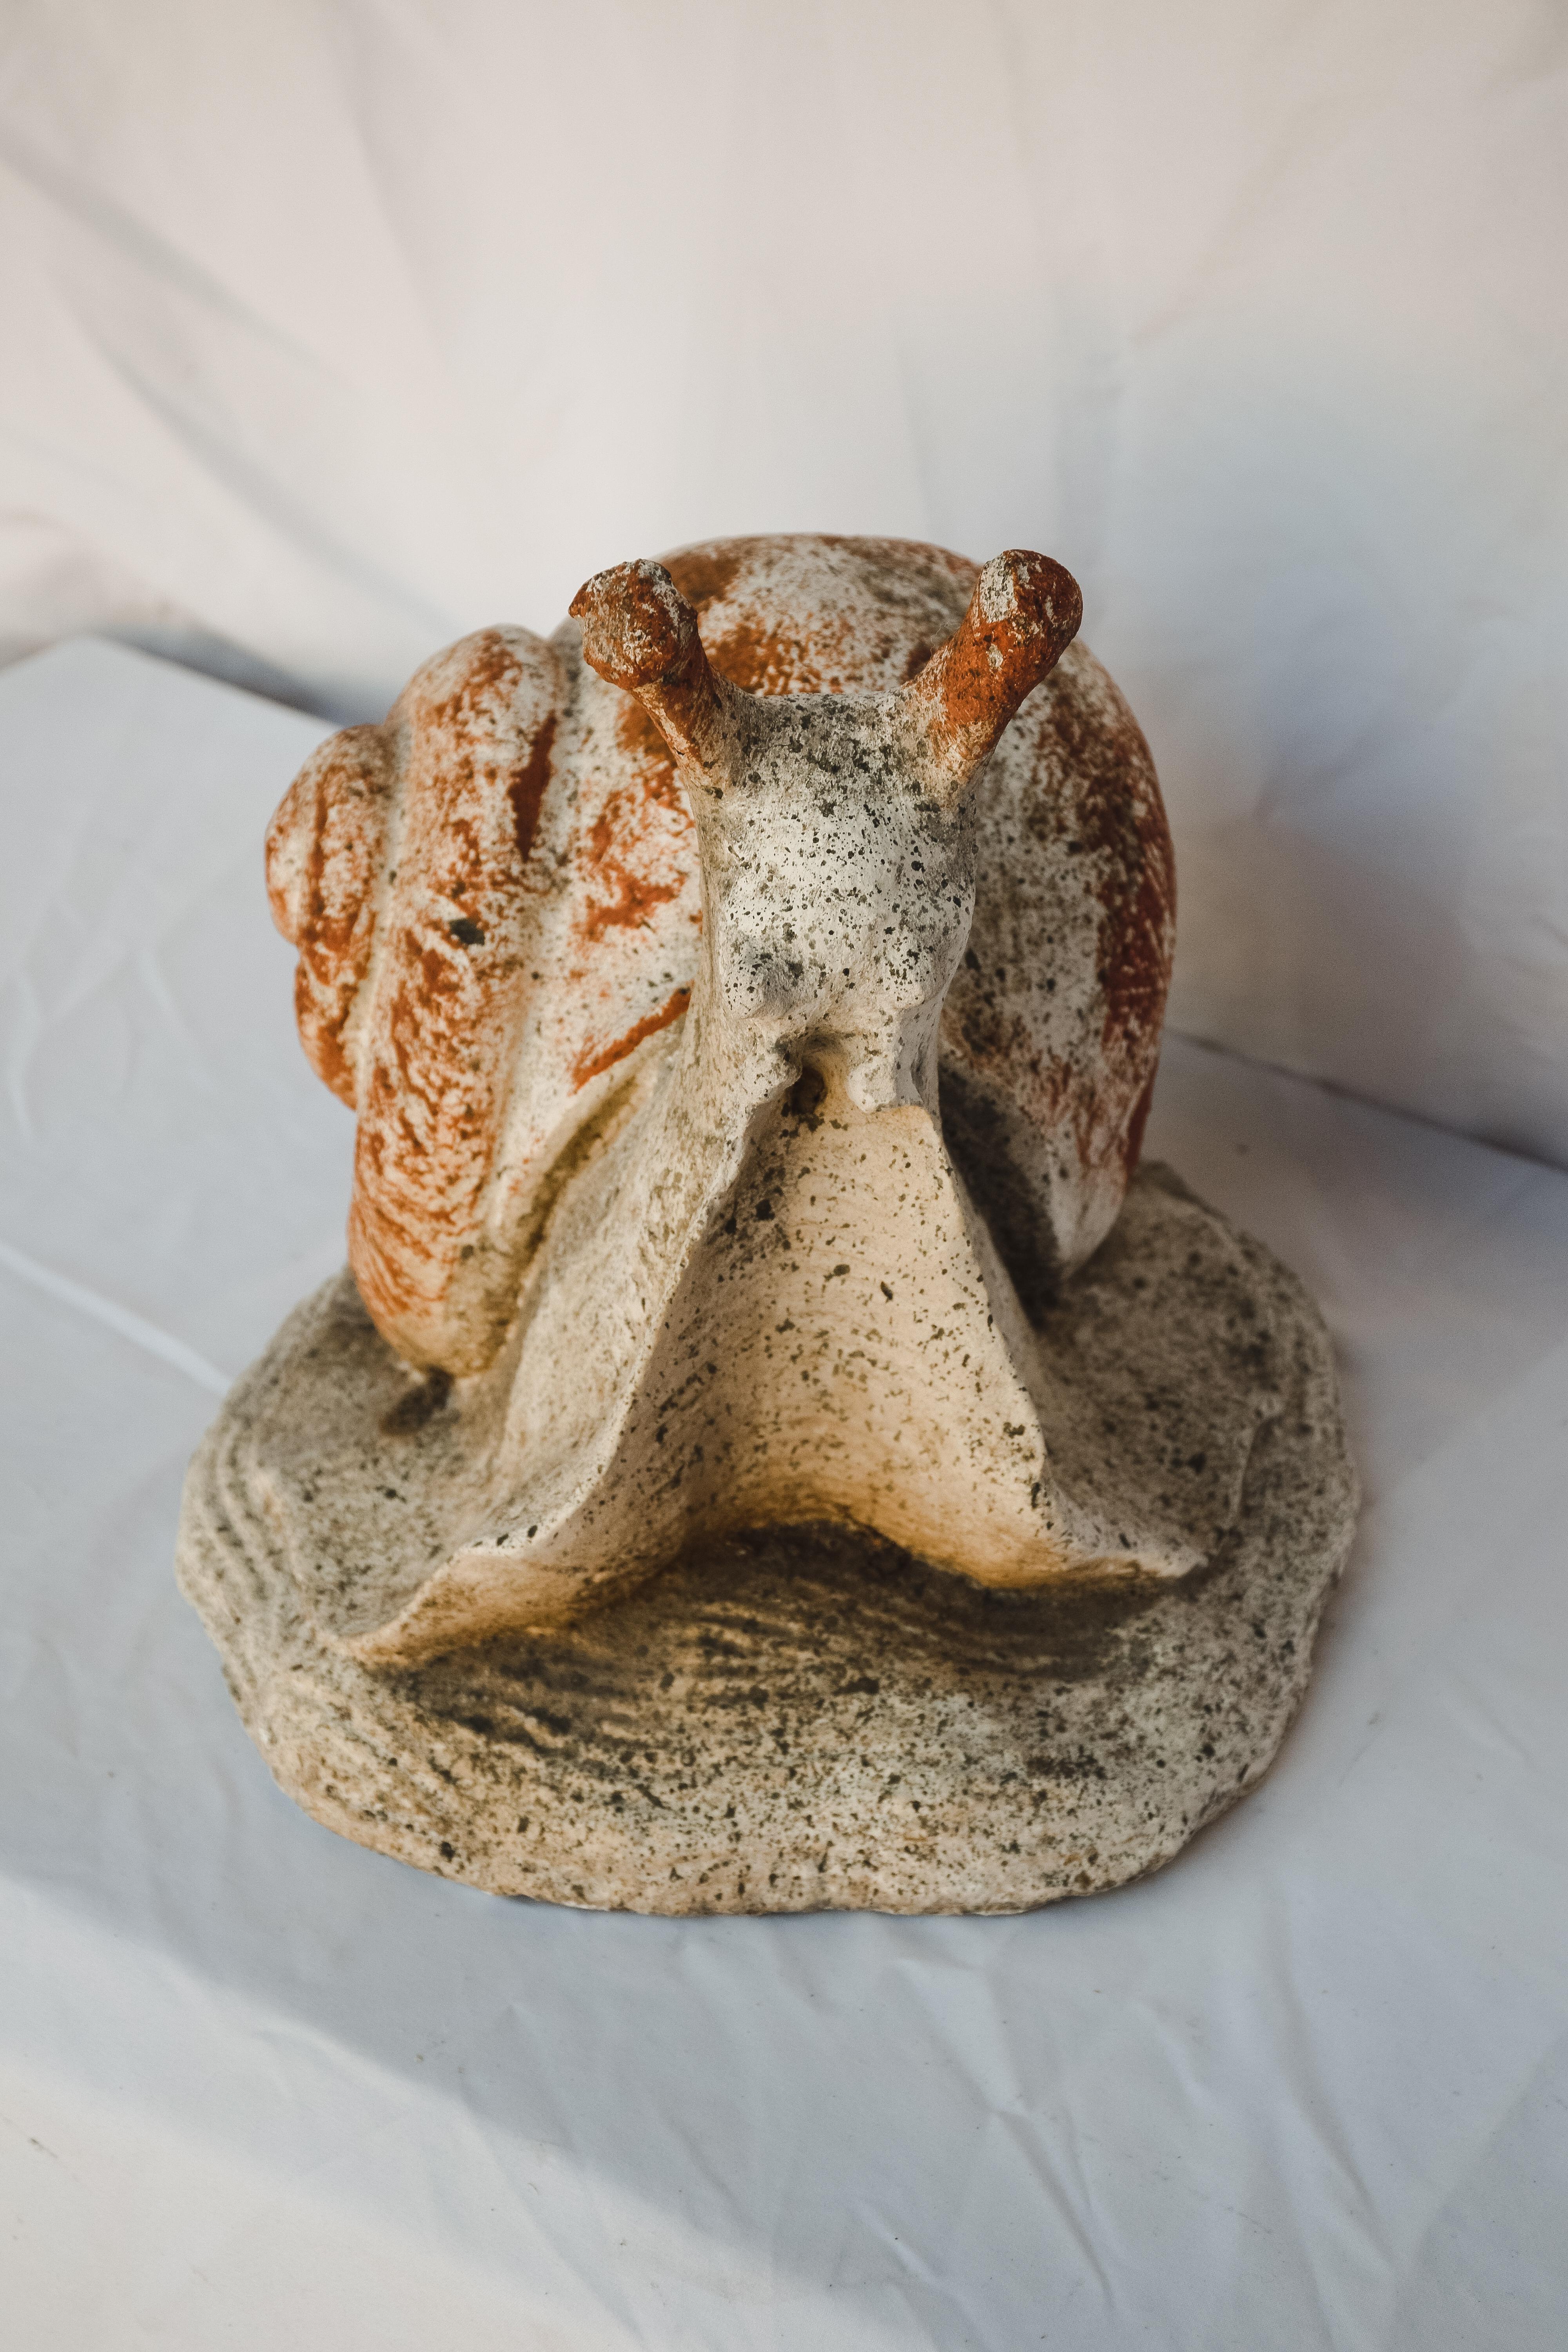 Mid-20th Century Concrete Garden Snail. This garden element has an amazing time worn patina. Could be placed on a patio or in the garden. But honestly so incredible indoors. Great Conversations piece.